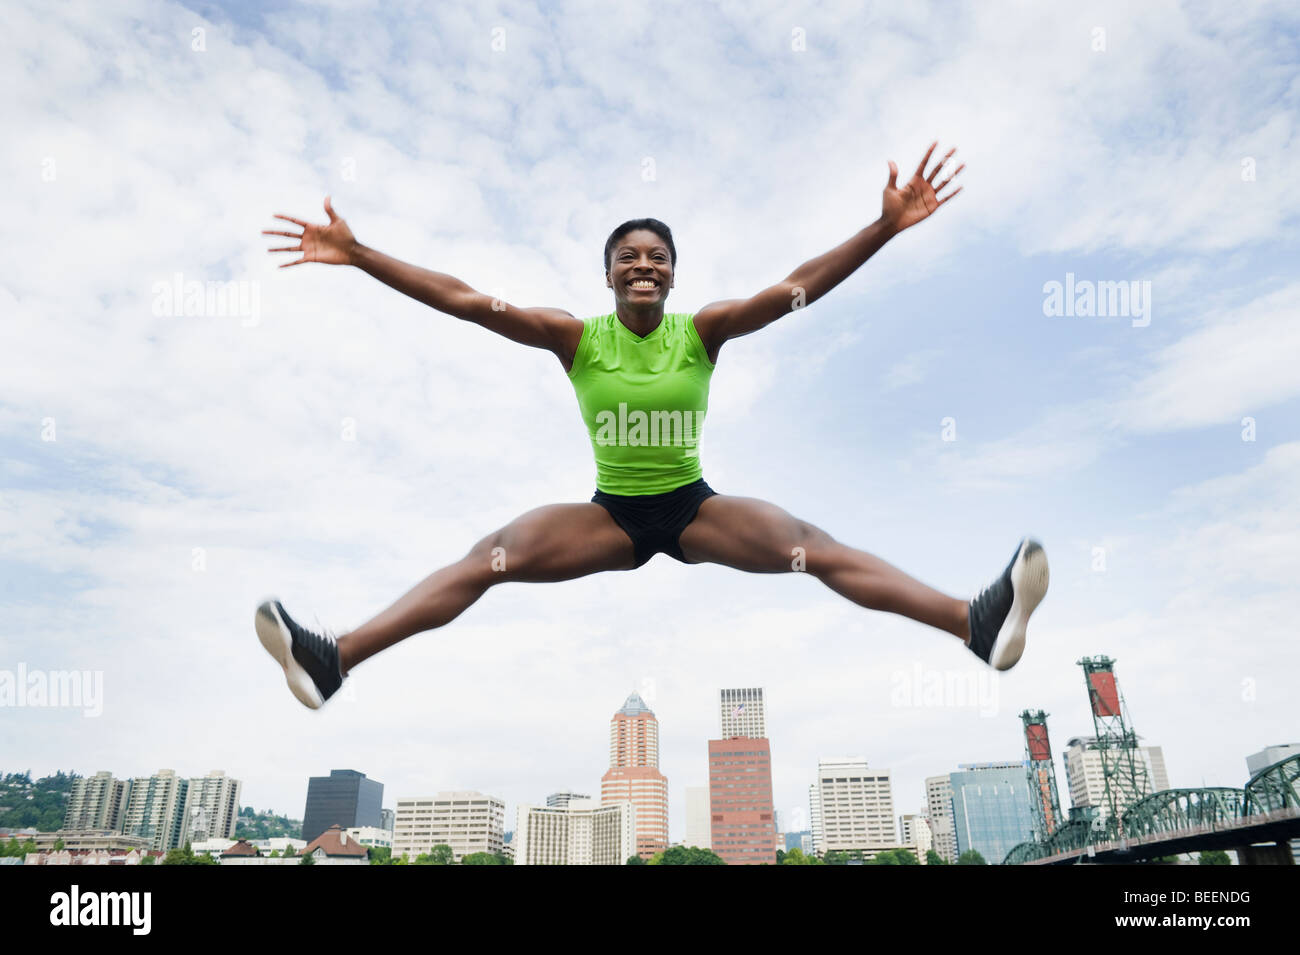 African woman jumping with city in background Stock Photo